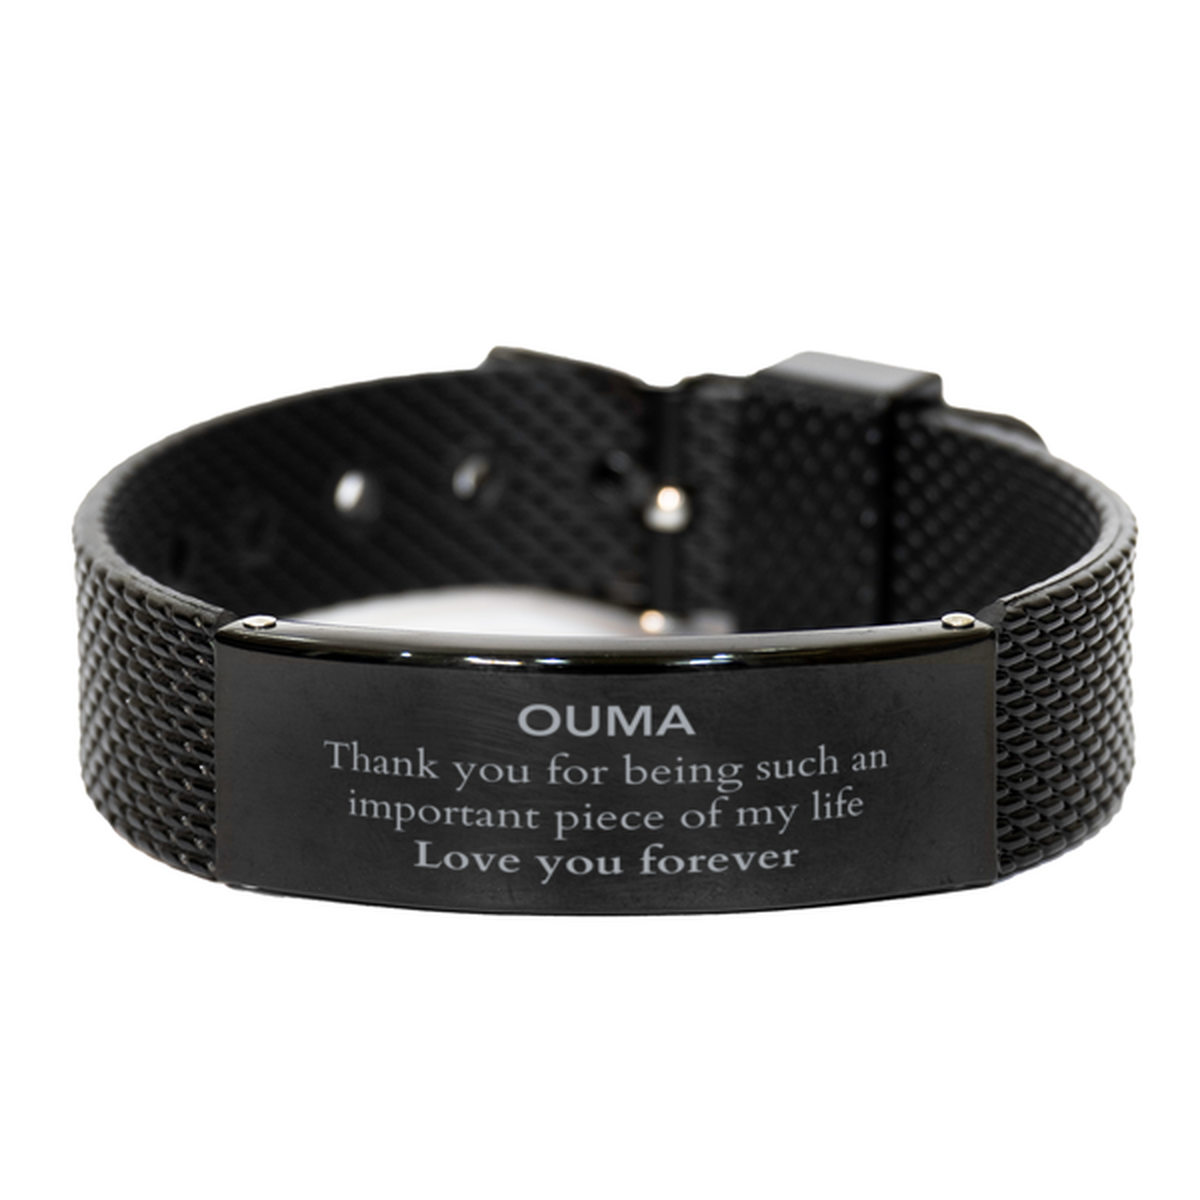 Appropriate Ouma Black Shark Mesh Bracelet Epic Birthday Gifts for Ouma Thank you for being such an important piece of my life Ouma Christmas Mothers Fathers Day